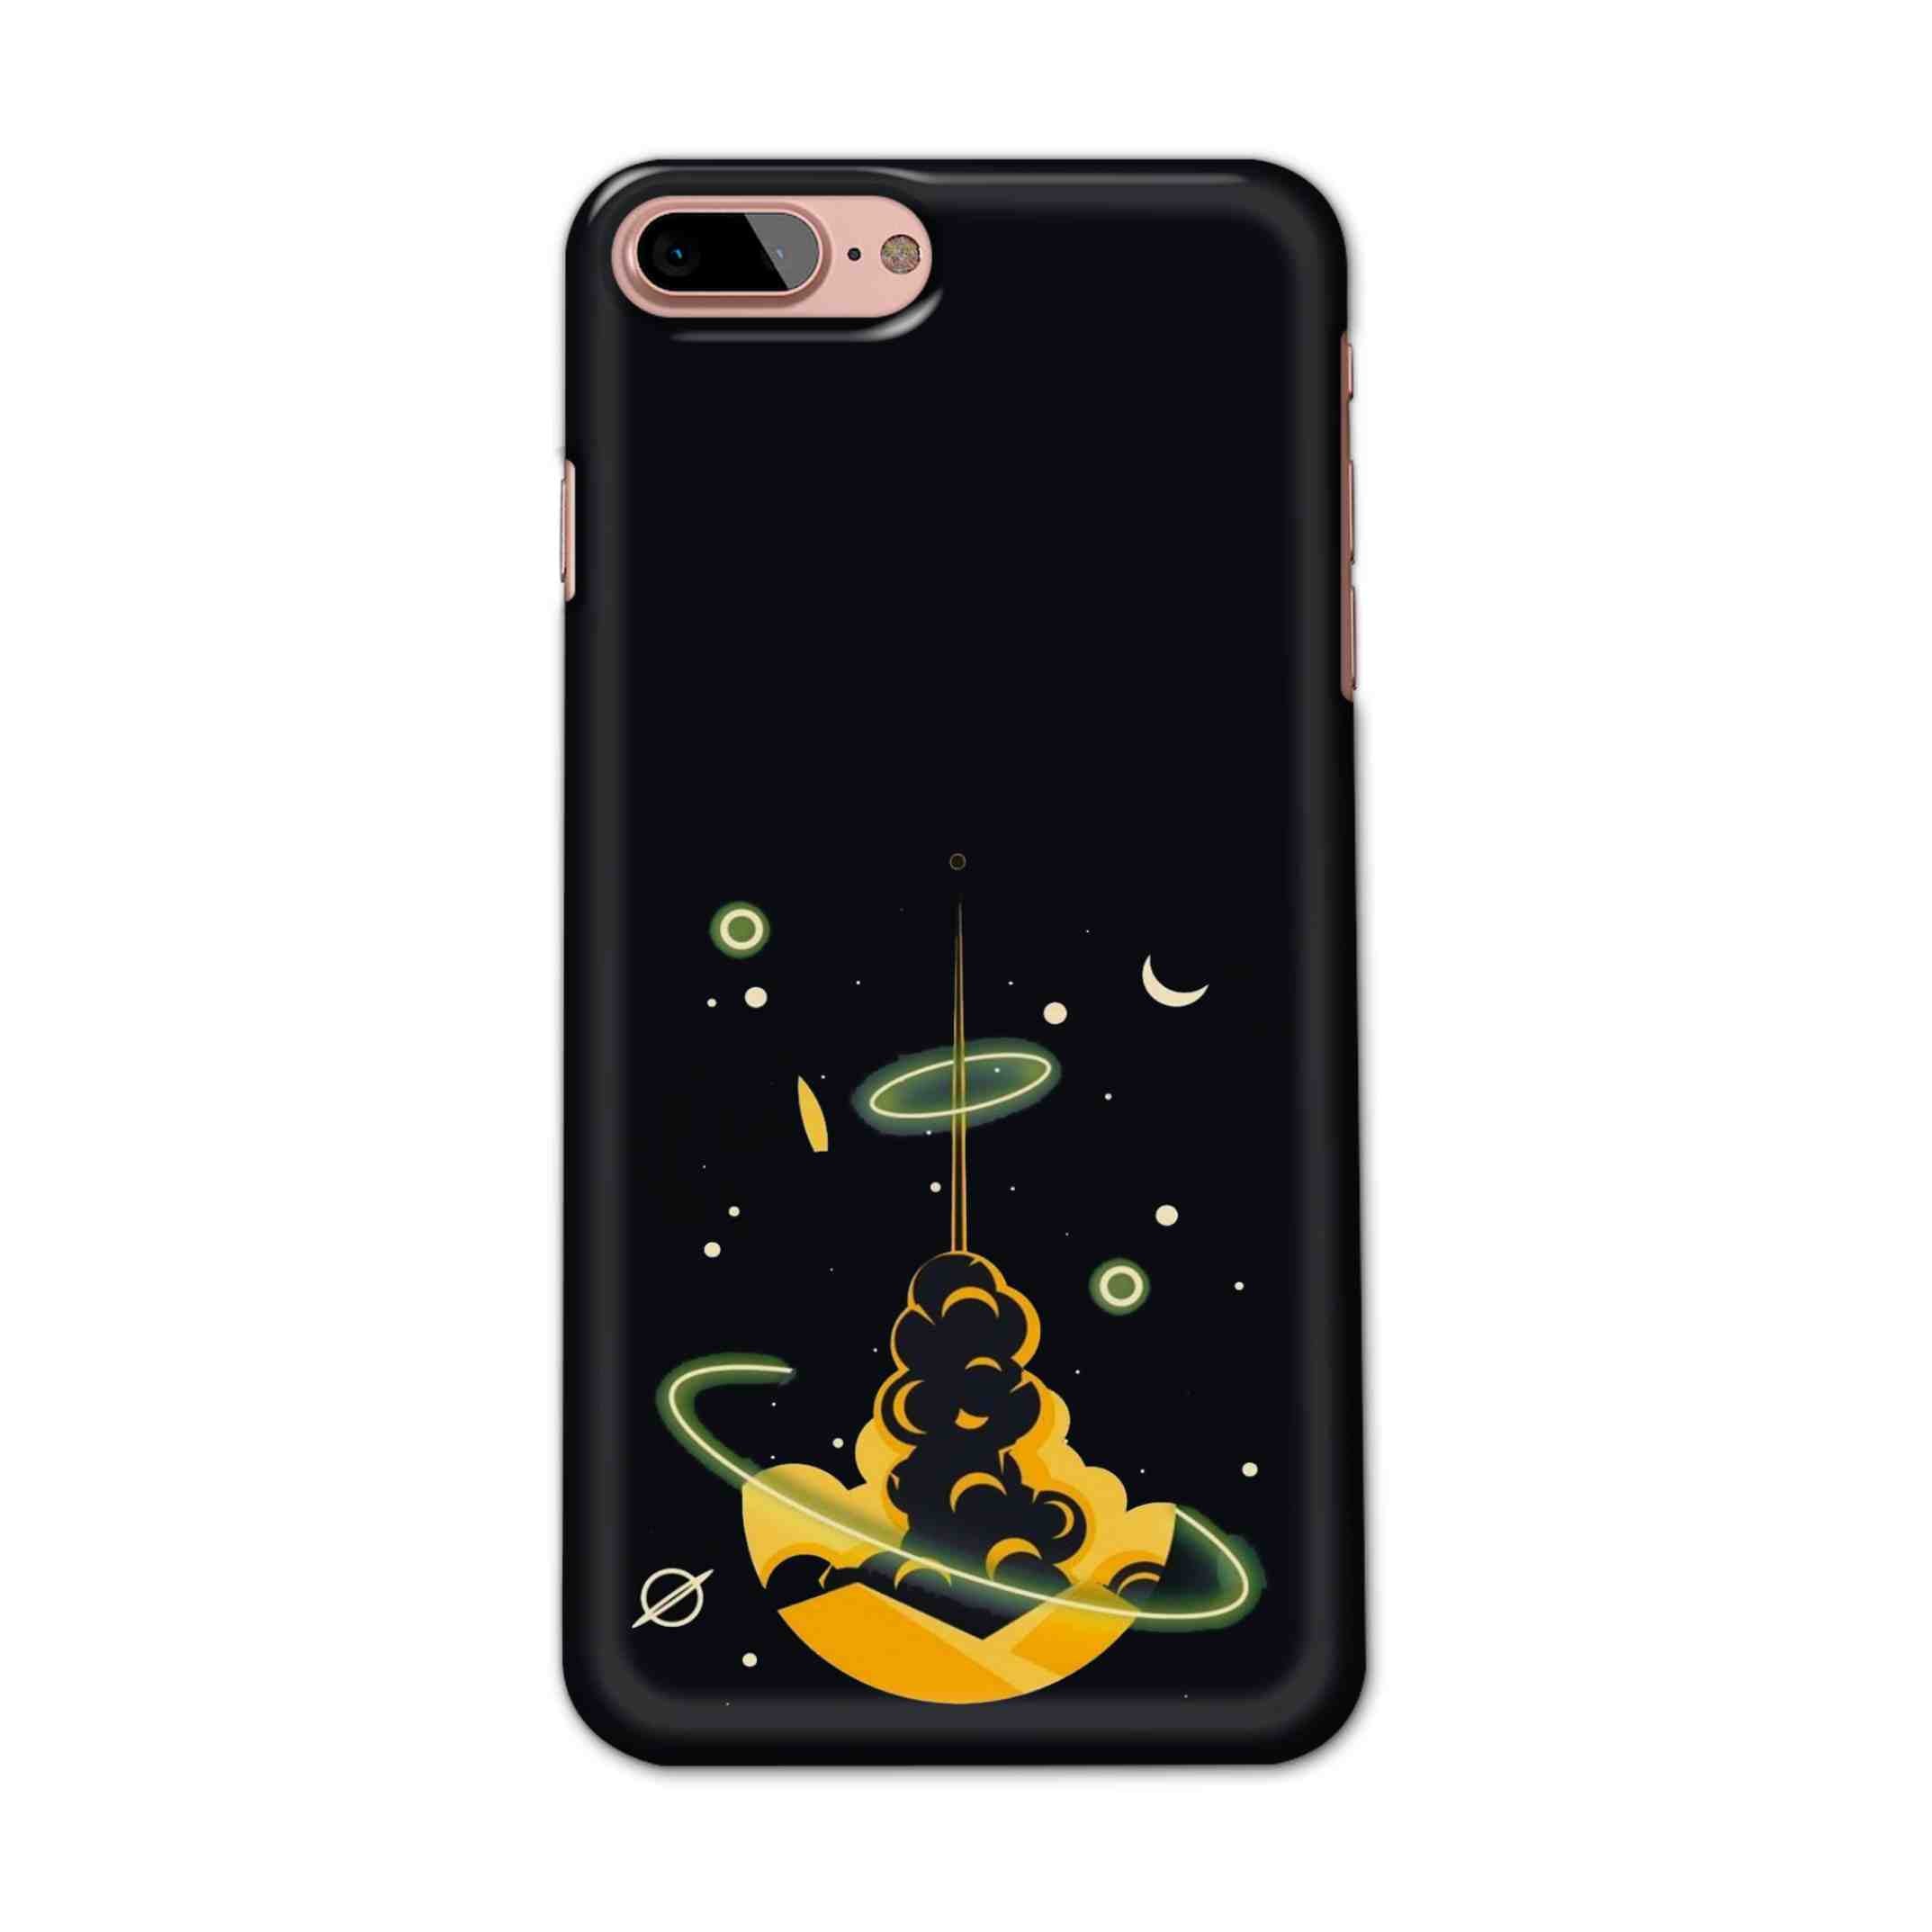 Buy Moon Hard Back Mobile Phone Case/Cover For iPhone 7 Plus / 8 Plus Online